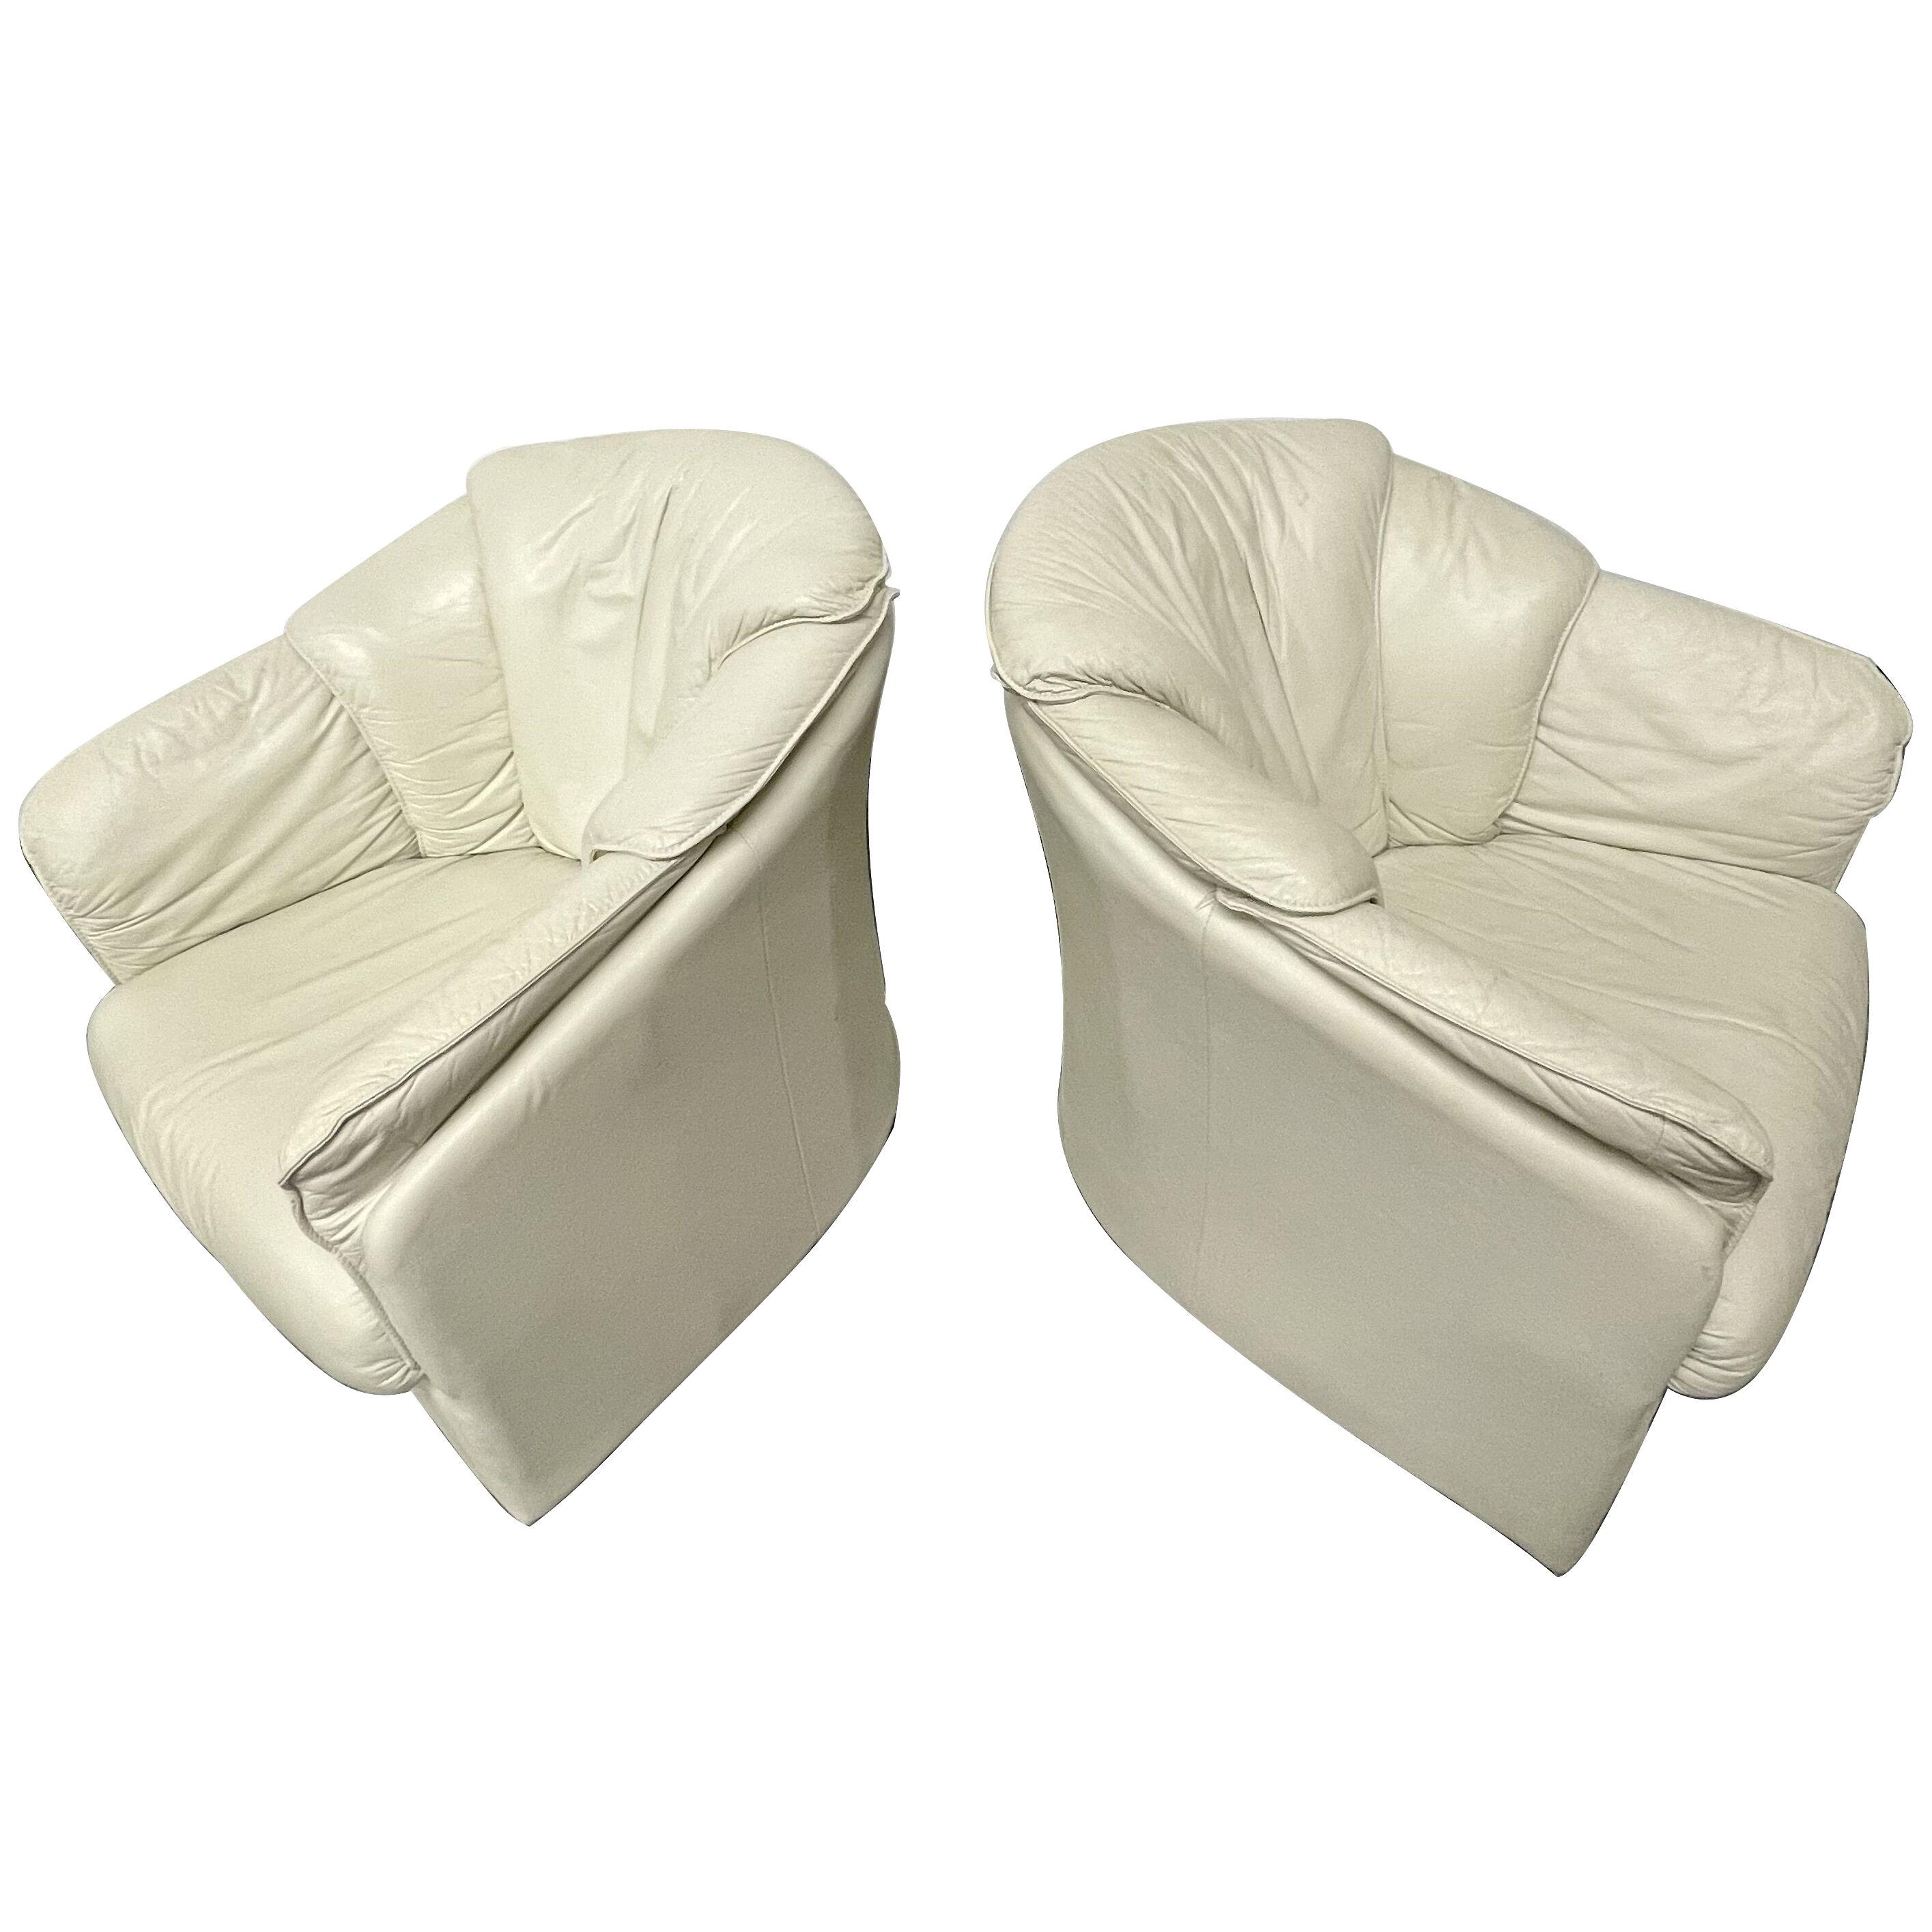 Pair Beige Italian Leather Swivel Chairs, Lounge Chairs